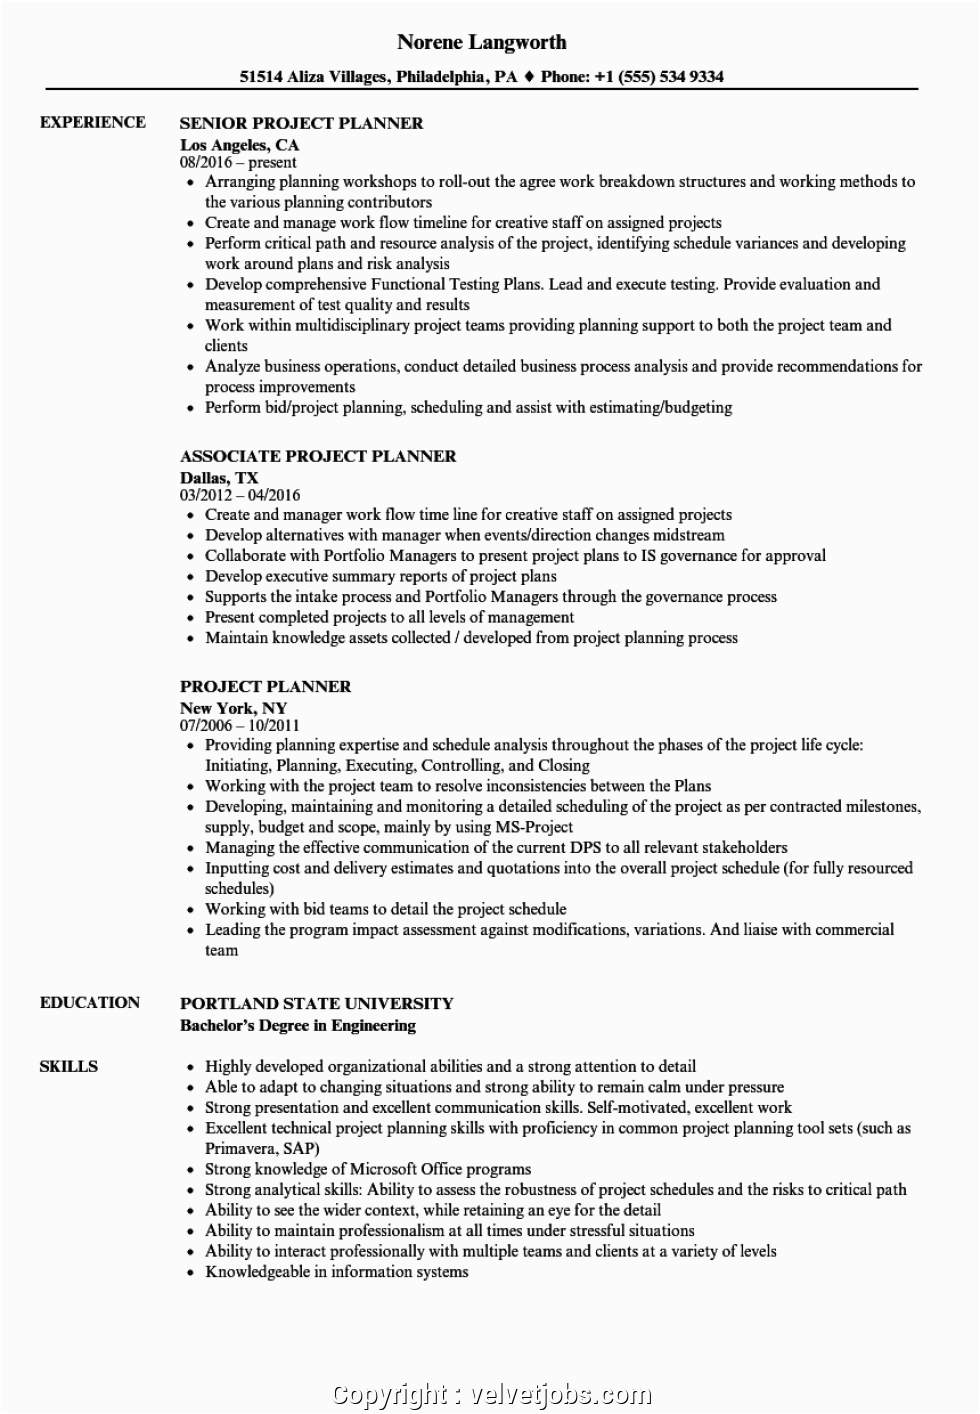 Sample Resume for Project Planner Scheduler Modern Project Planner Cv Project Planner Resume Samples